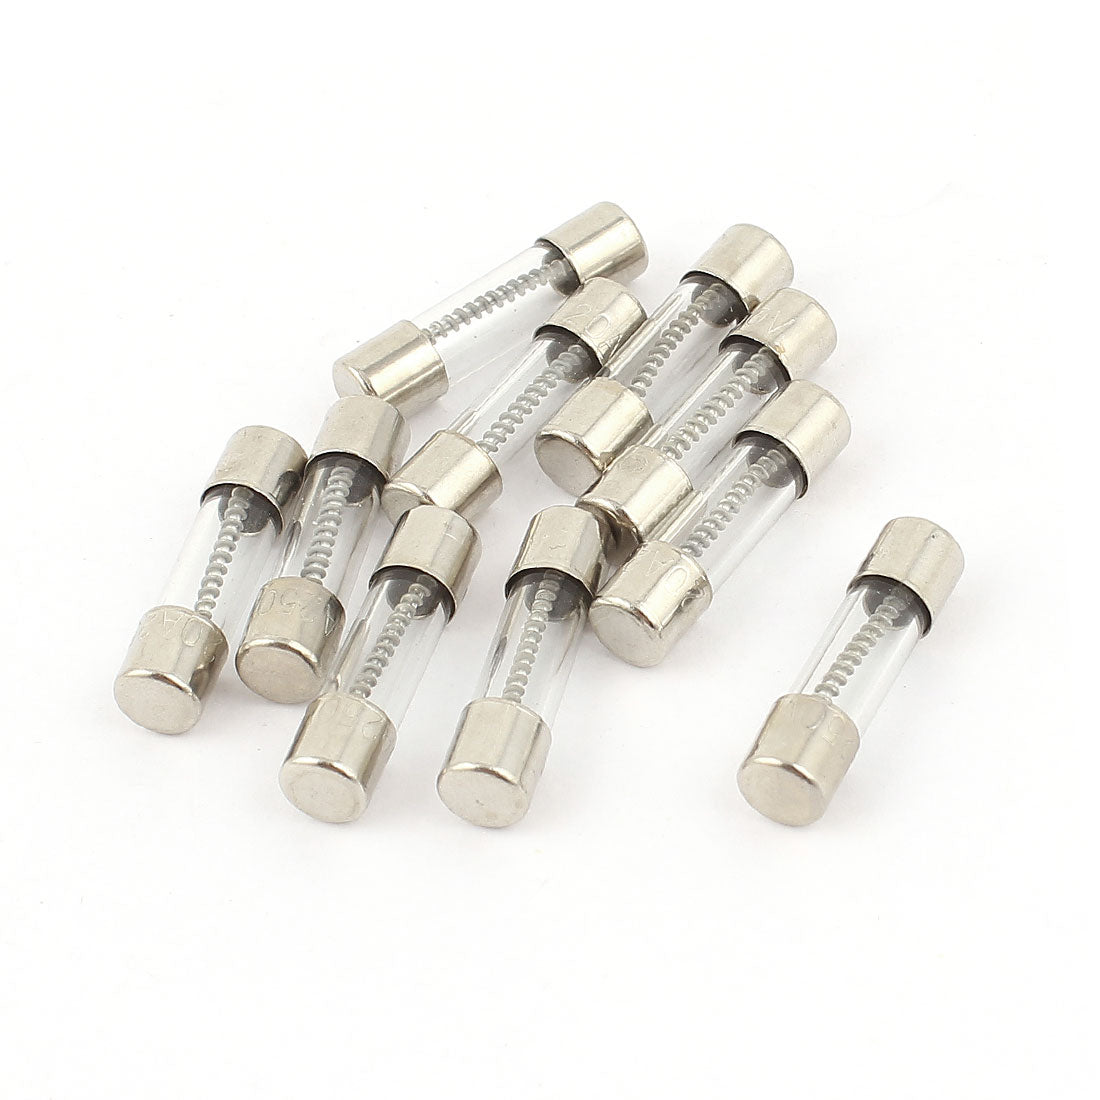 uxcell Uxcell 10 Pcs 250V 20A 20Slow Blow Glass Fuses Tubes 5mm x 20mm